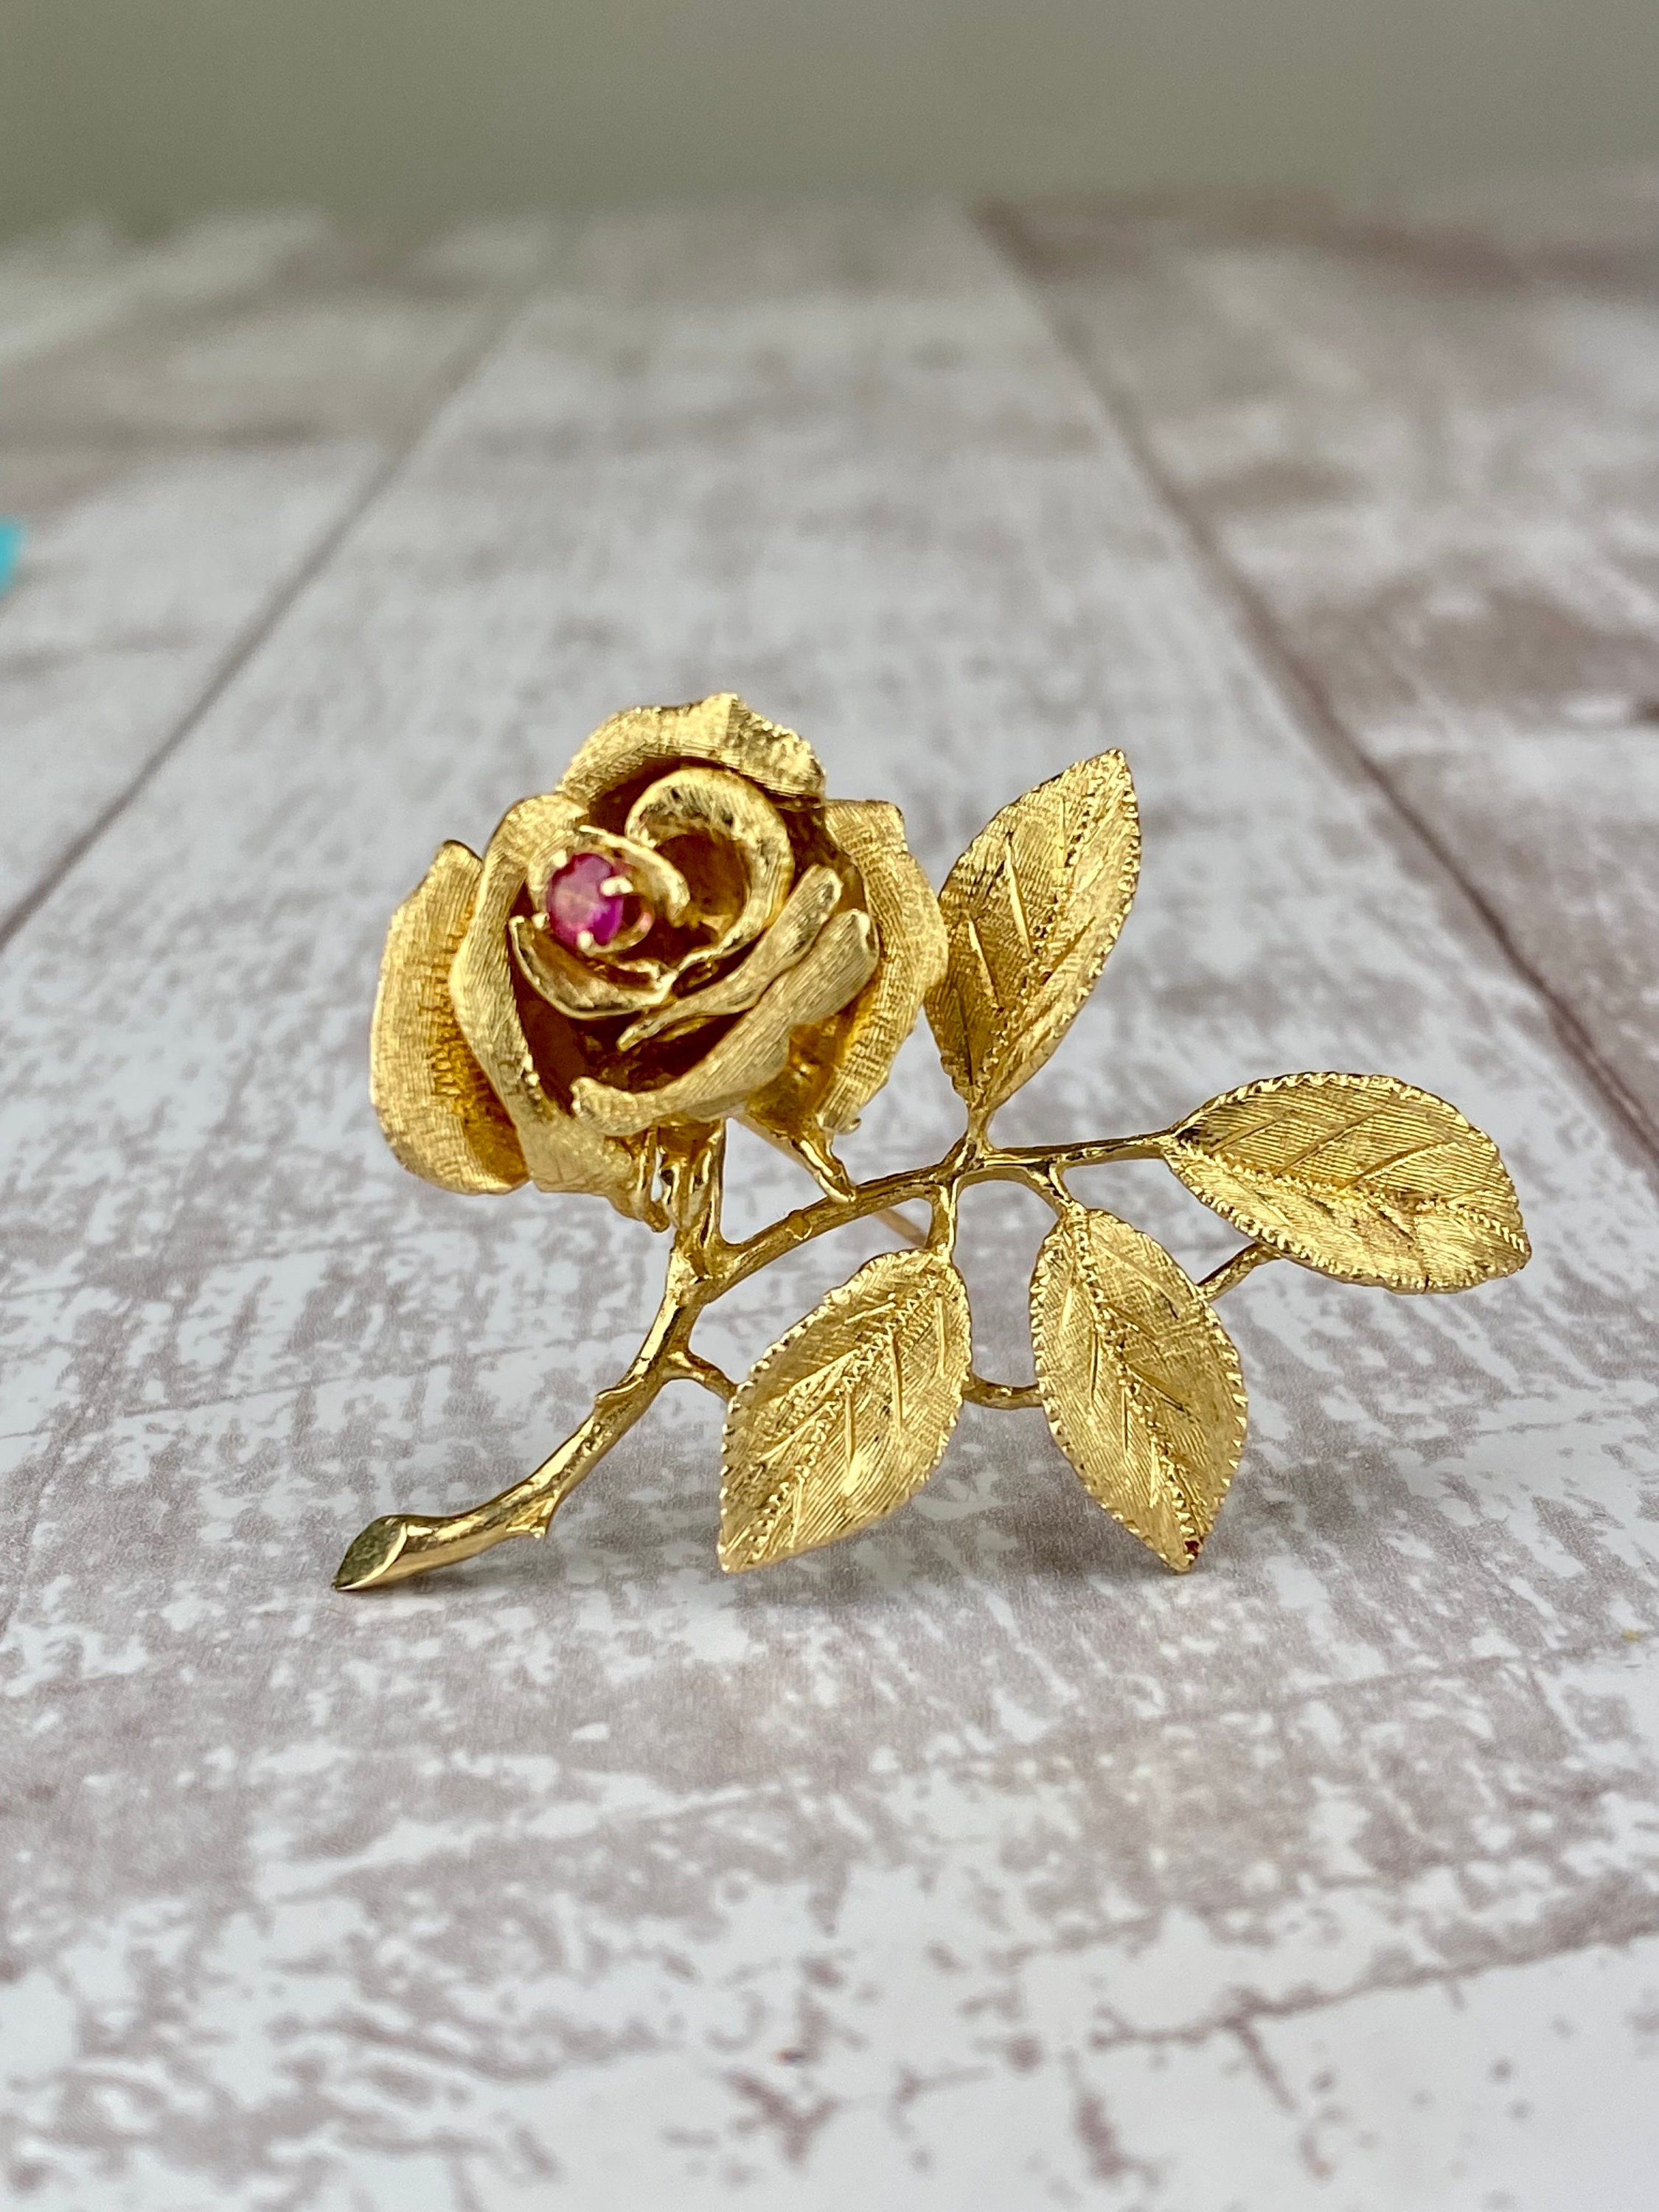 Vintage 1940s 14K Gold and Ruby Floral Wreath Brooch / Pin